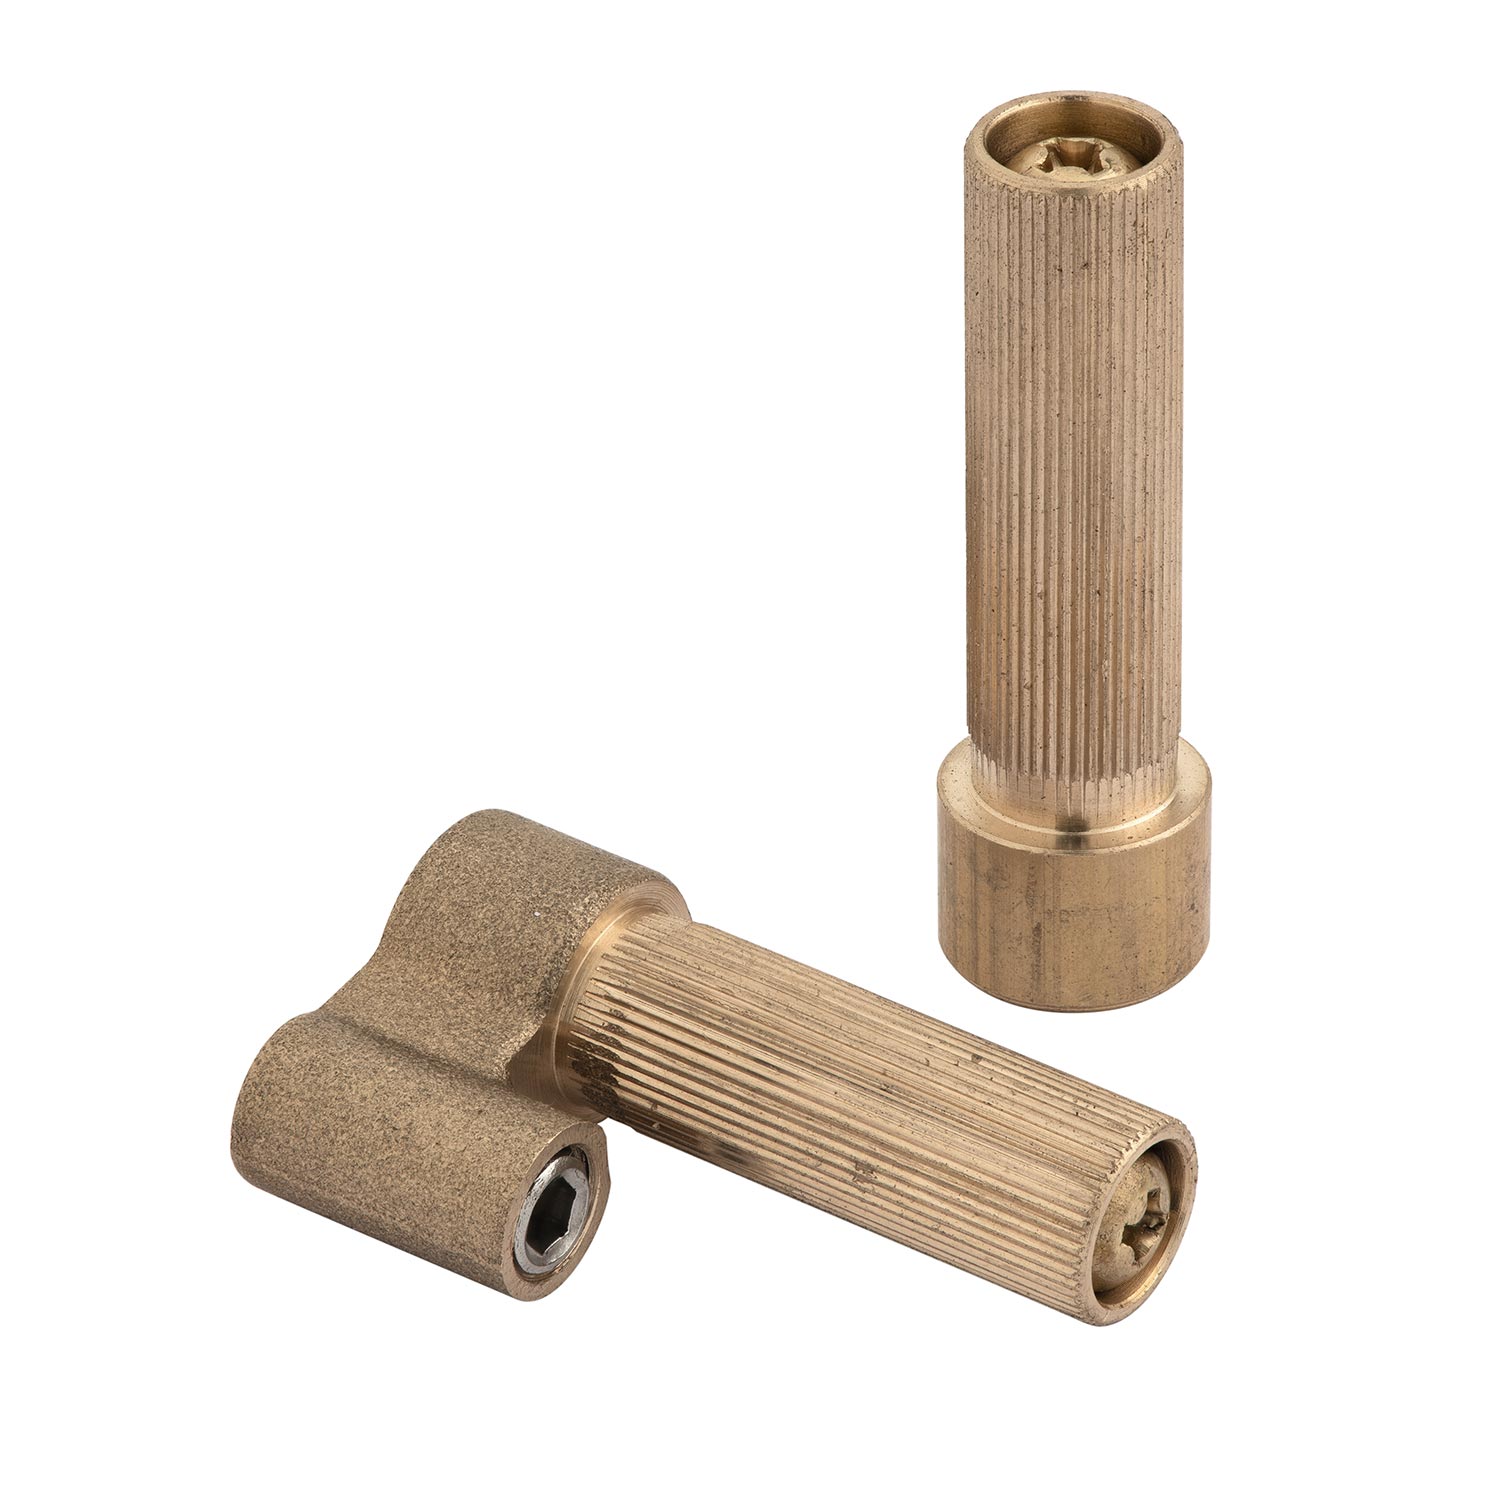 Brass thingamajig for a thermostatic shower valve